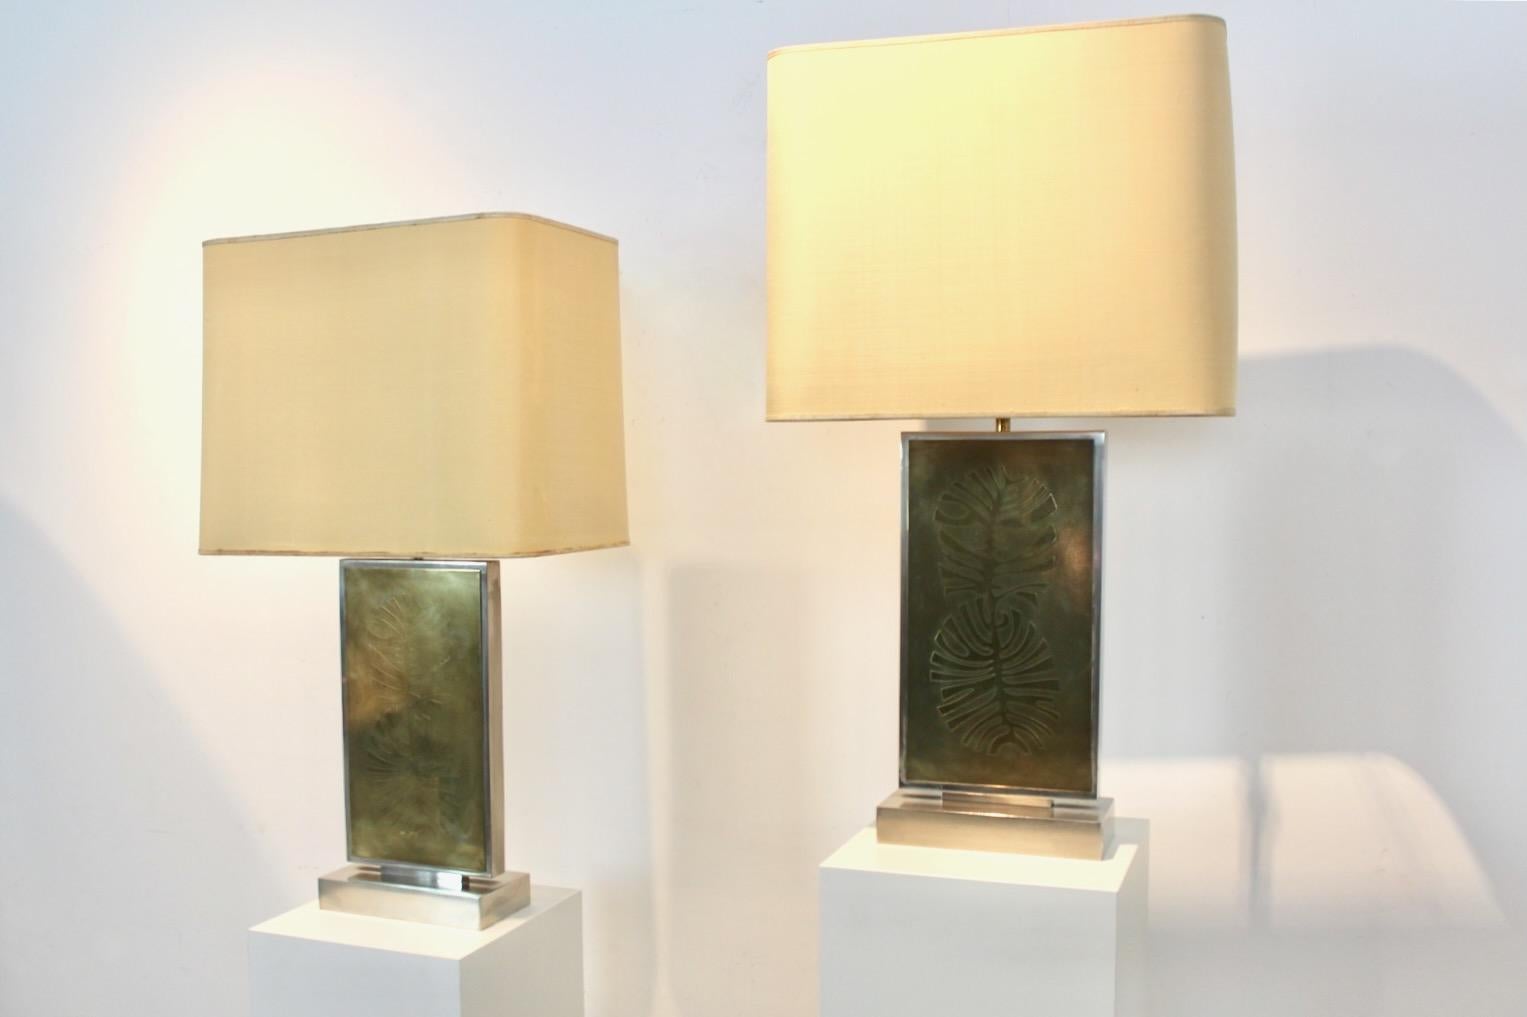 Rare pair of Mid-Century Table Lamps in Hollywood regency style from the ‘70s. These Huge and impressive collectable table lamps were made and signed by the Belgium artist Roger Vanhevel. They are adjustable in height and have the original shades.